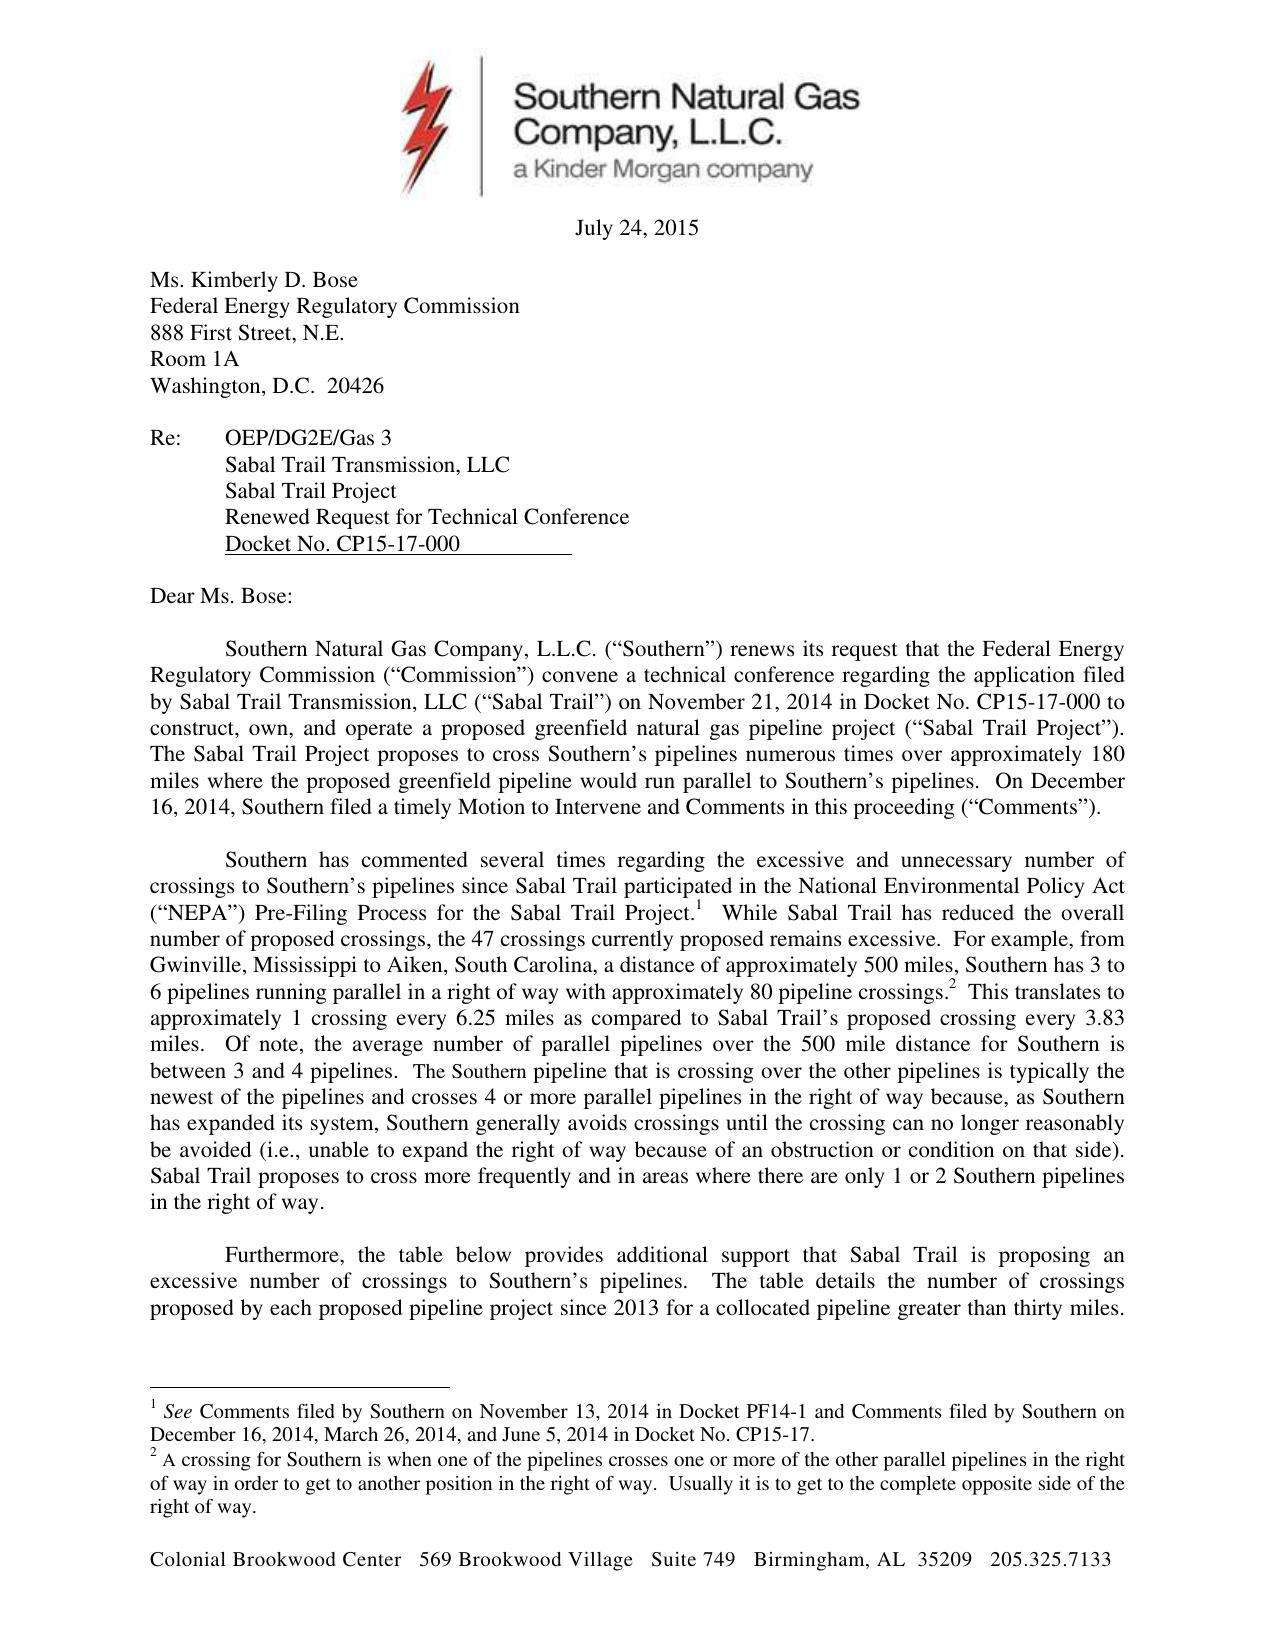 1275x1650 SONAT renews its request for a technical conference, in Sabal Trail is proposiong an excessive number of crossings, by Southern Natural Gas, for SpectraBusters.org, 24 July 2015